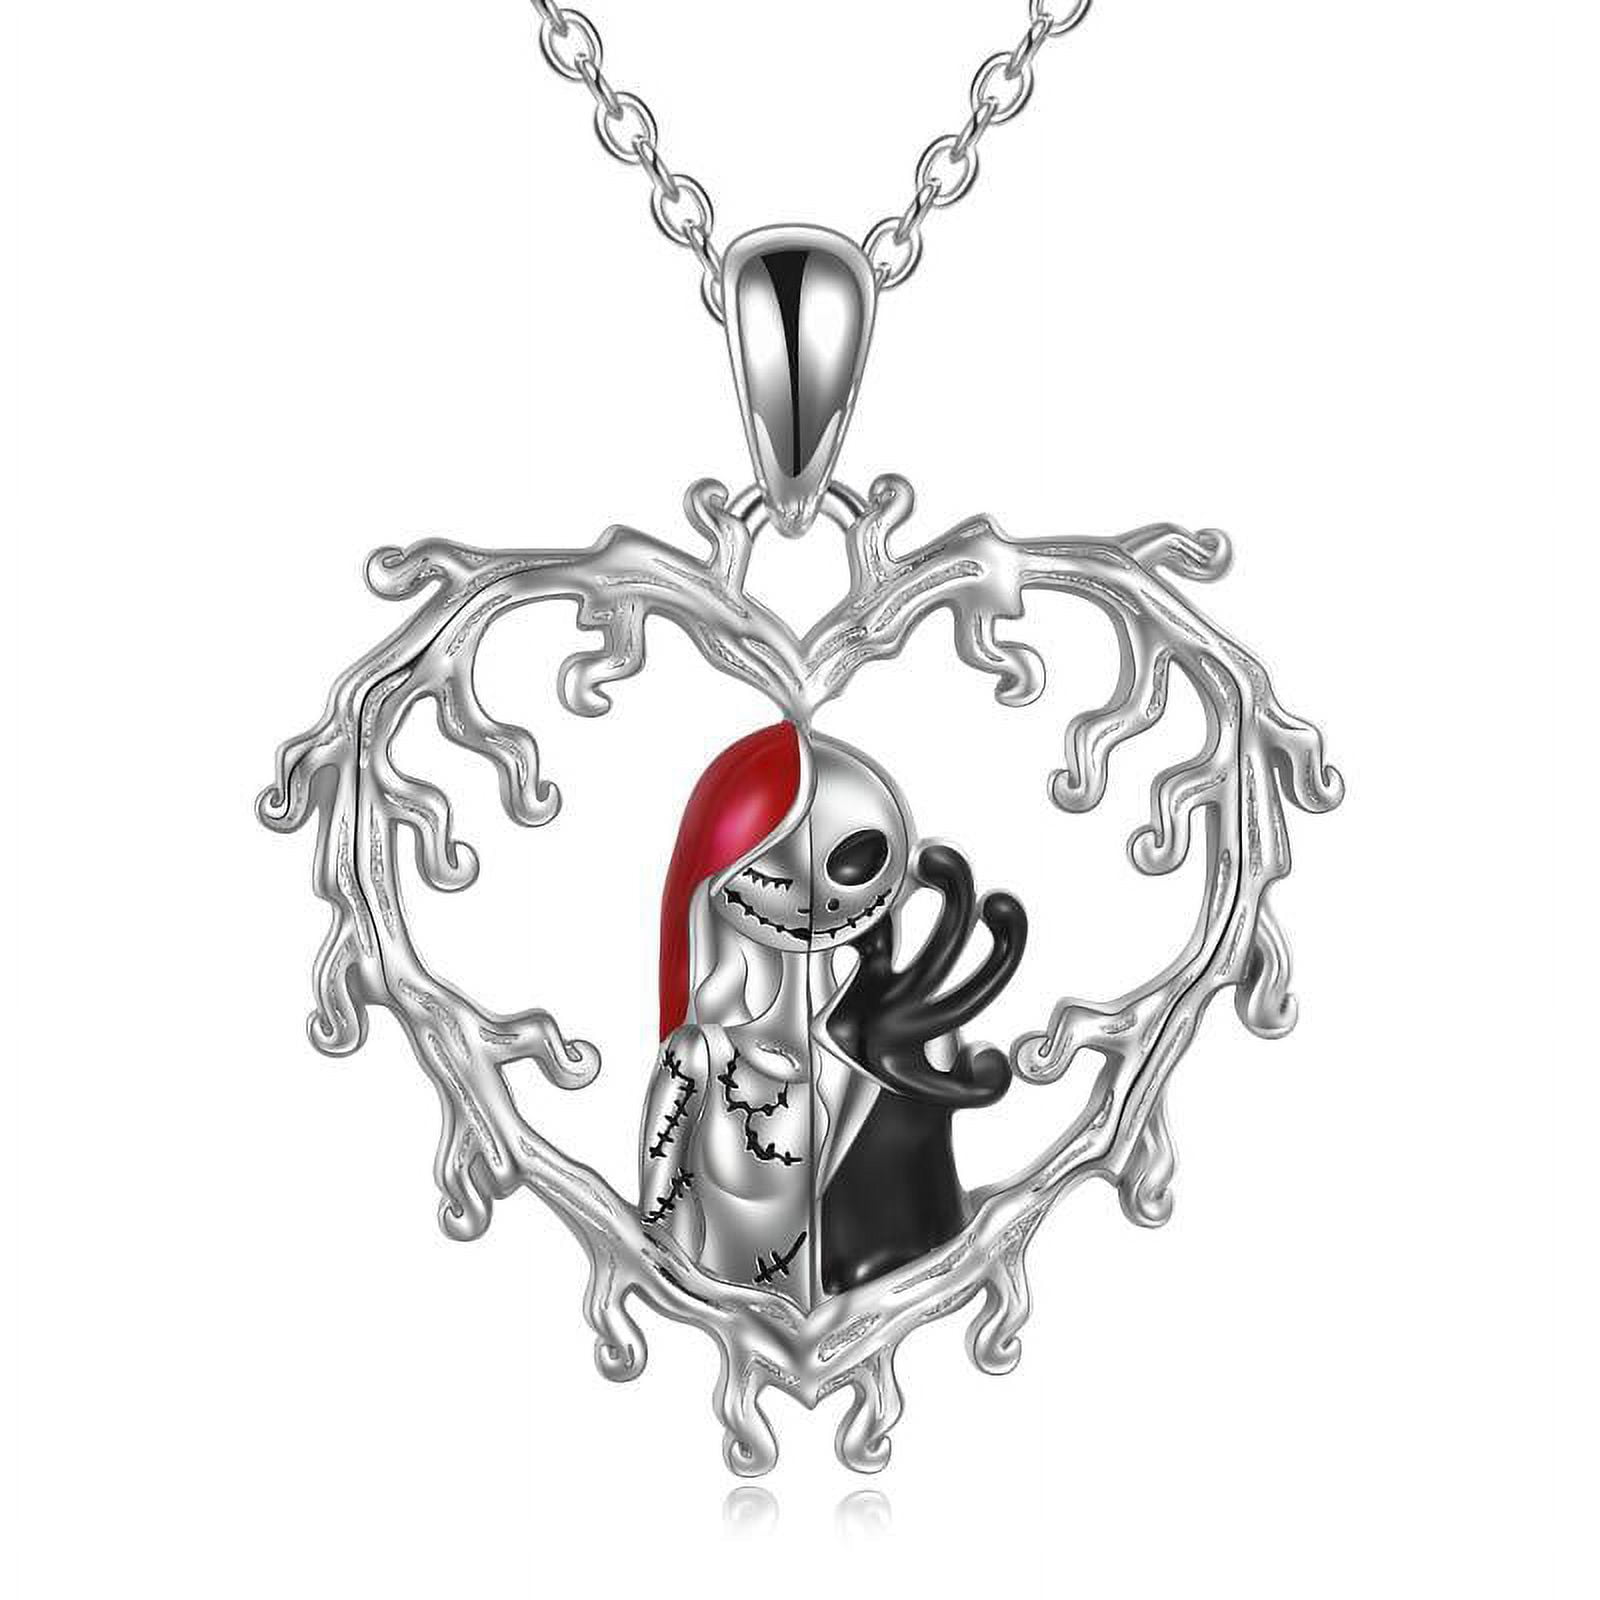 Jack Skellington and Sally Sterling Silver Necklace | Valentines necklace,  Cute love heart, Heart pendant necklace